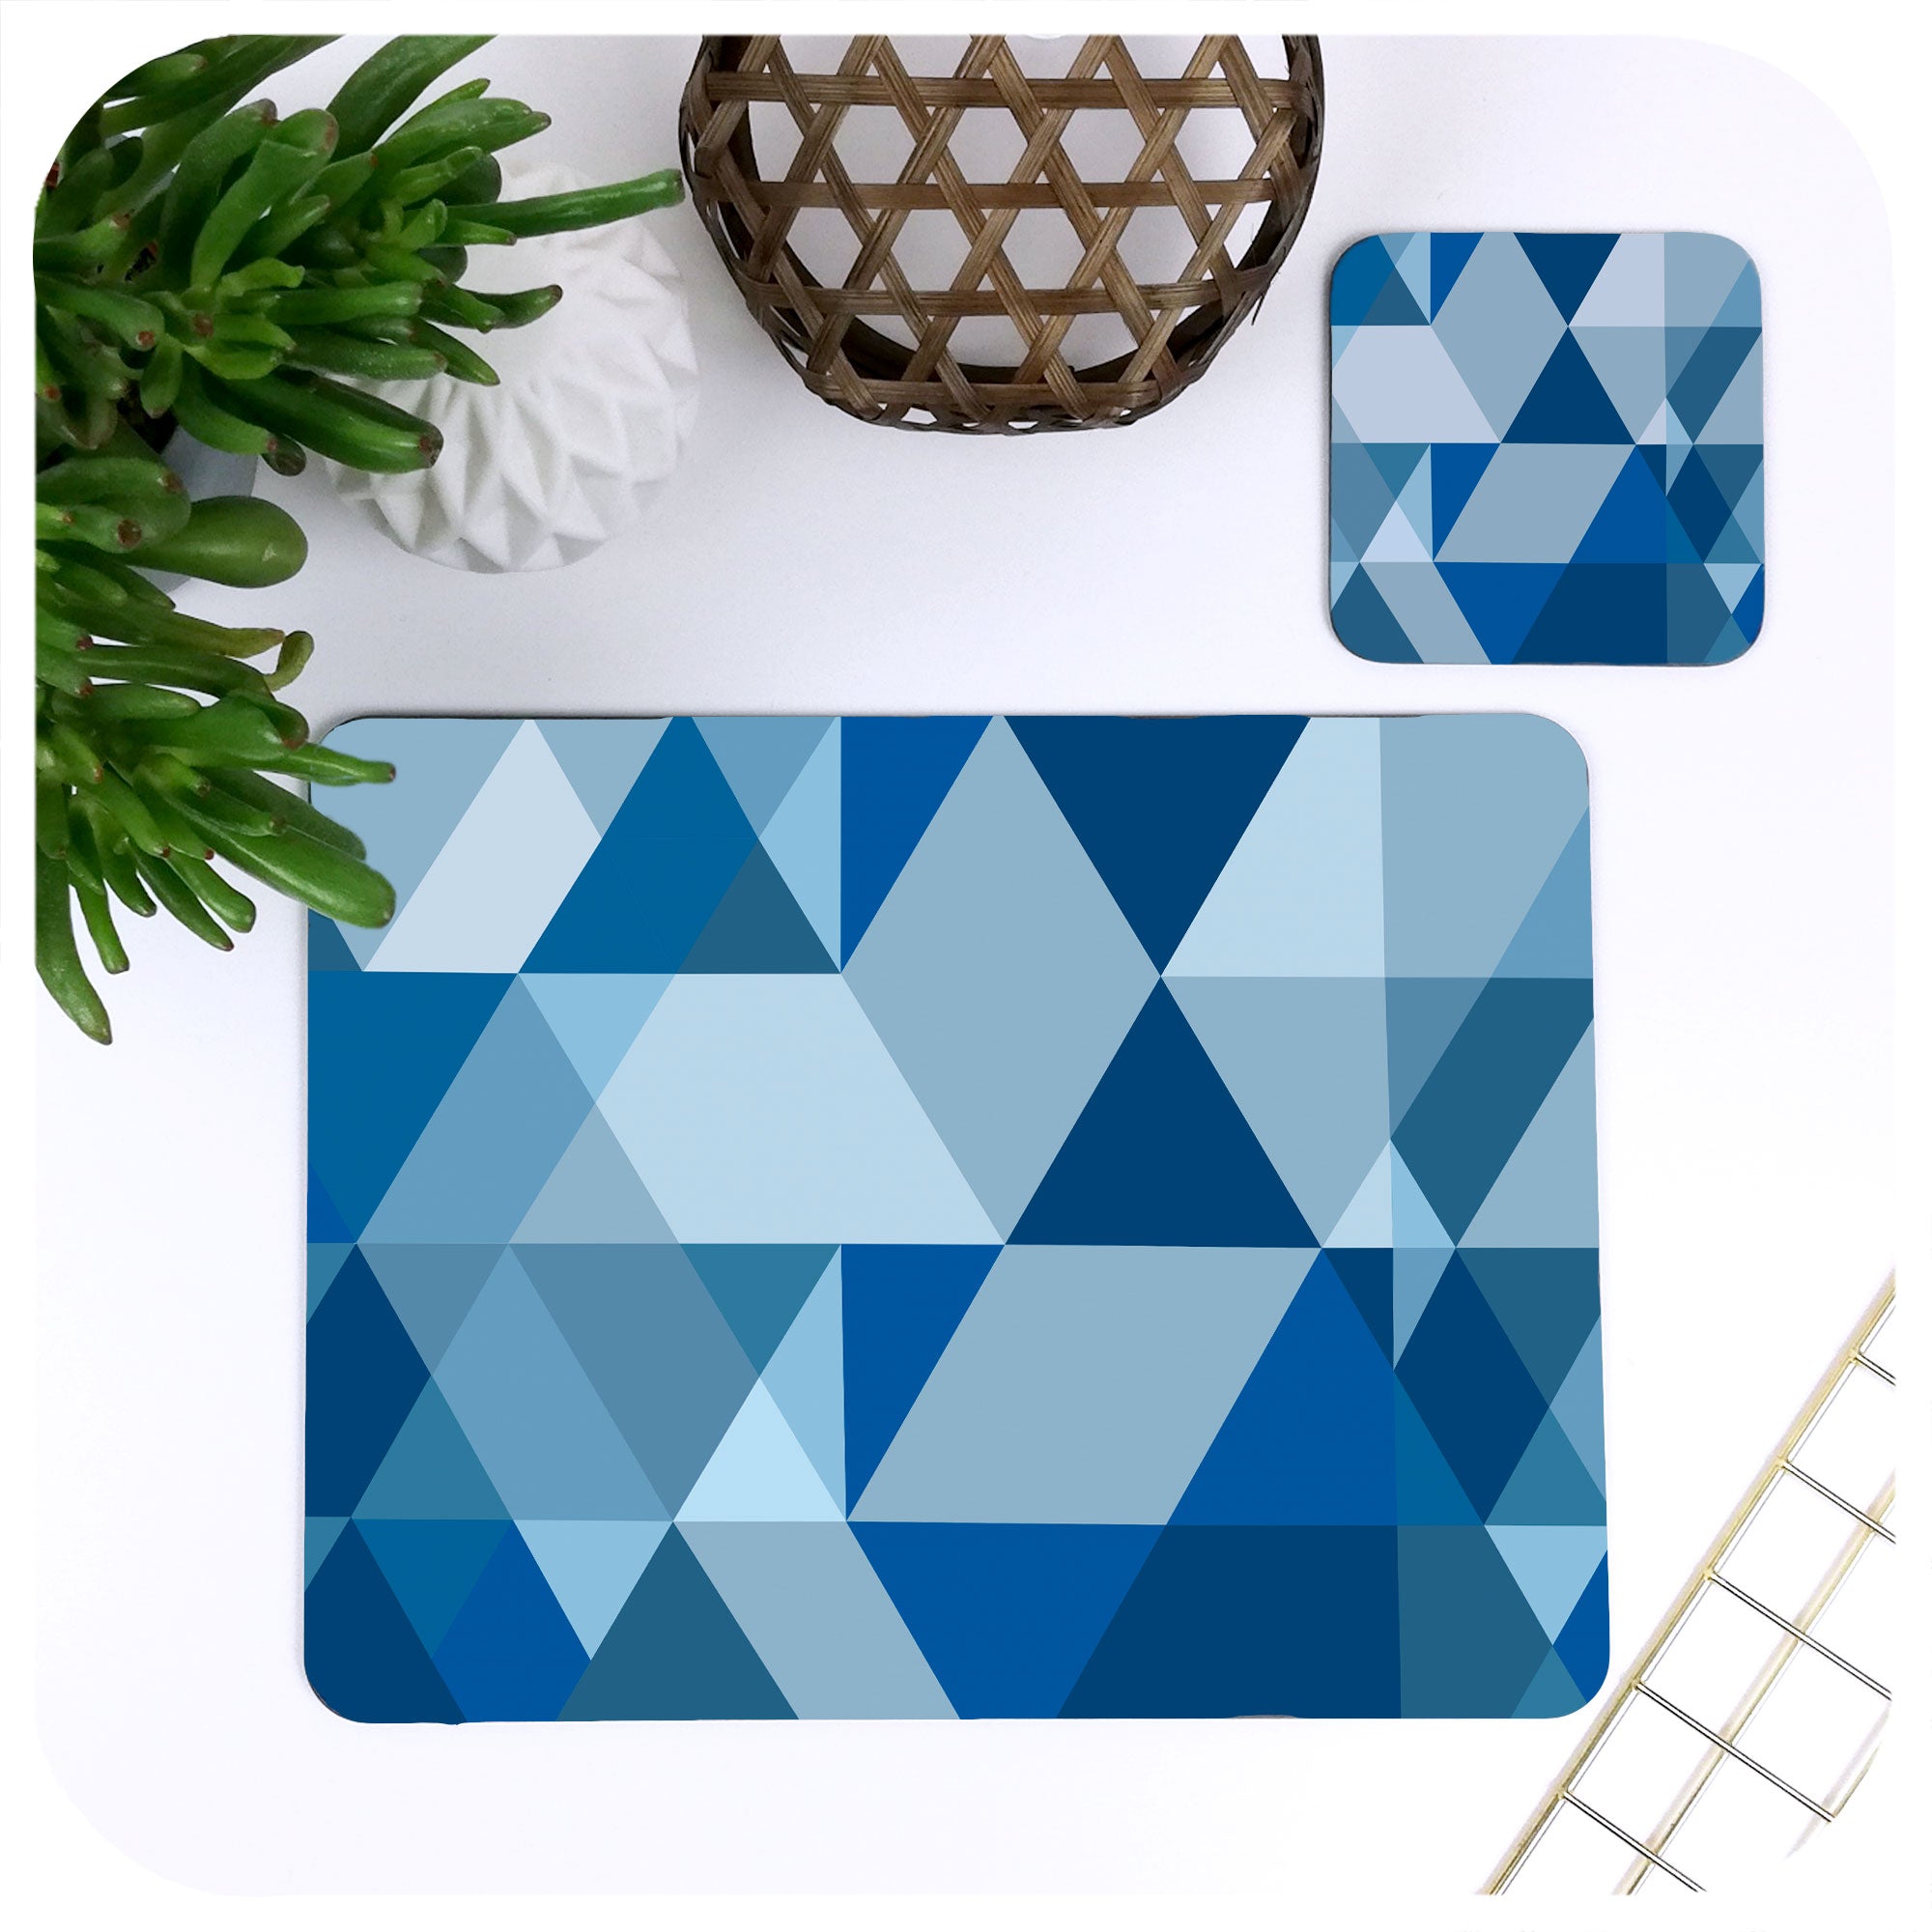 Scandinavian Geometric Tableware in Blue, one placemat and matching coaster | The Inkabilly Emporium